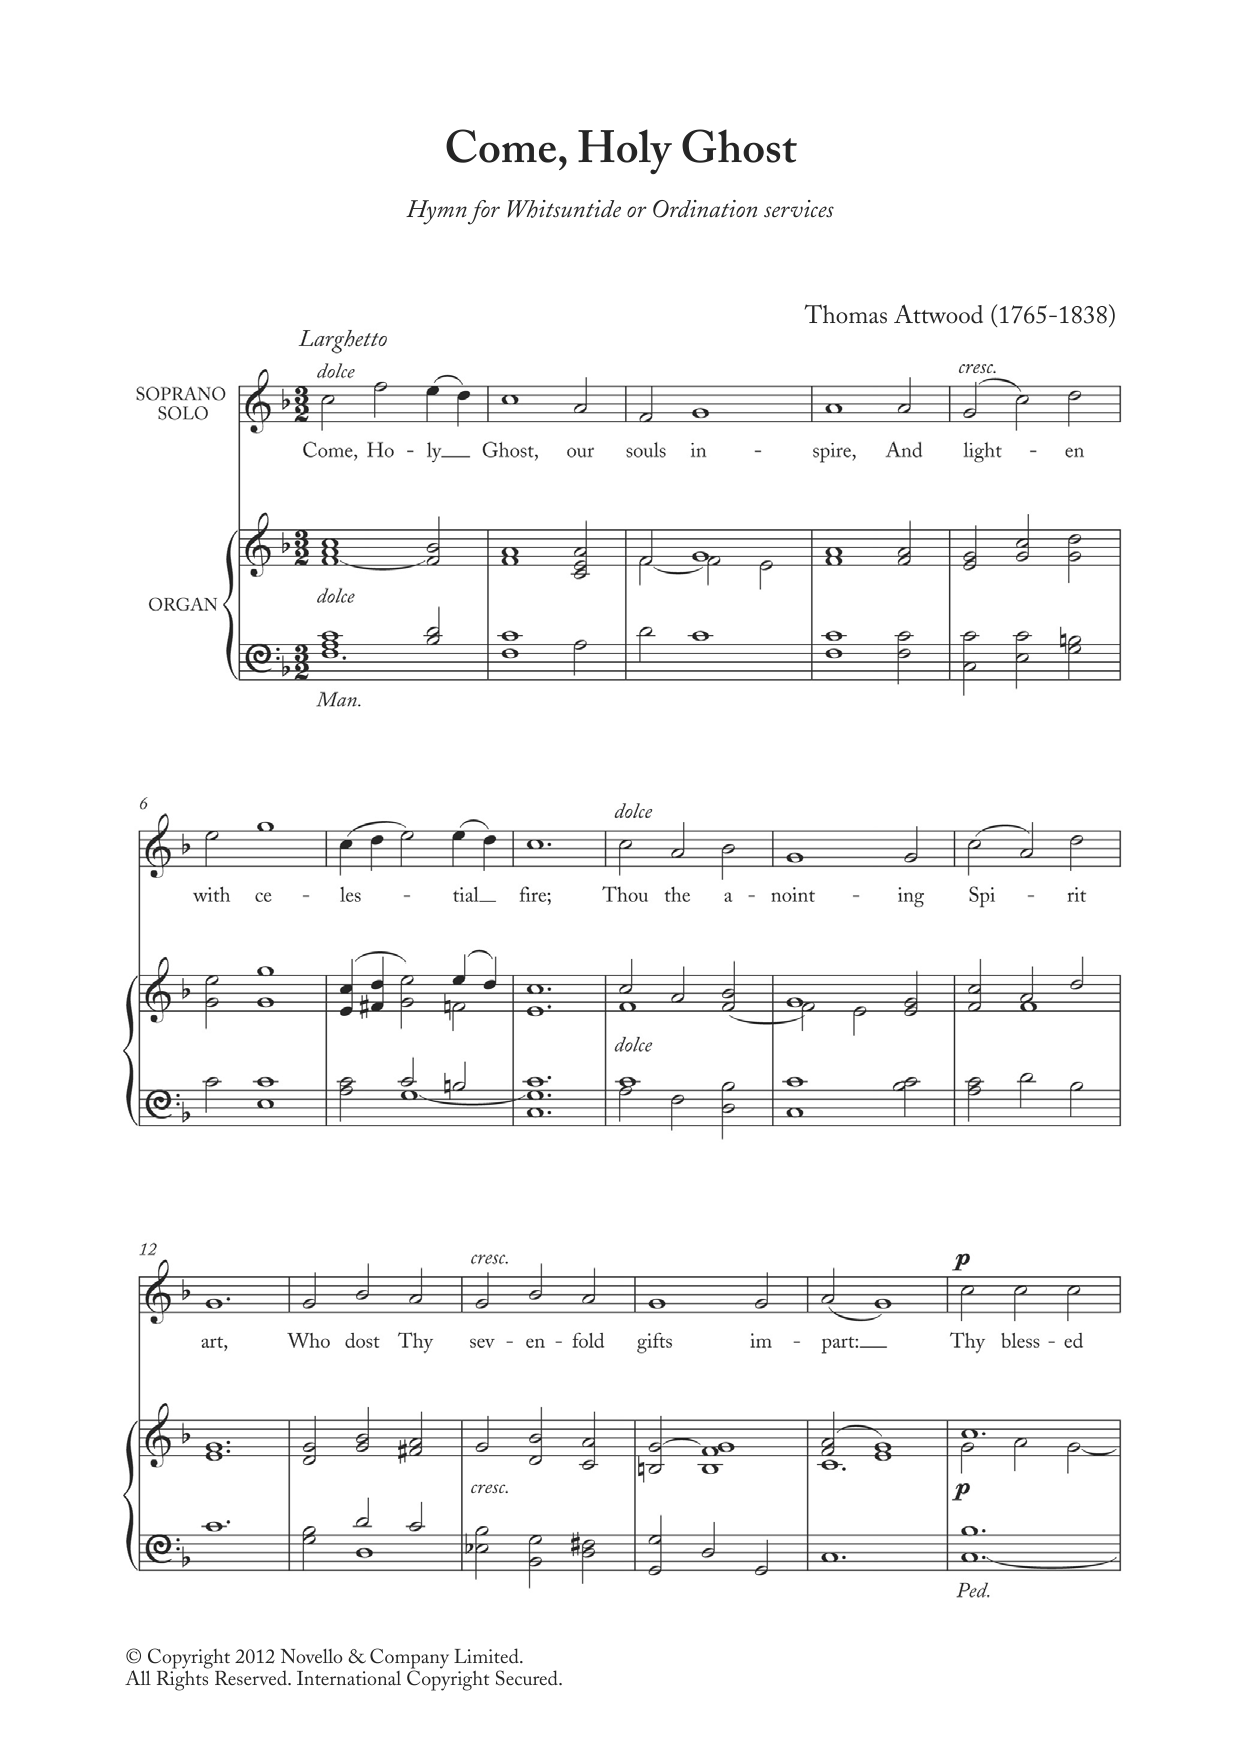 Download Thomas Attwood Come, Holy Ghost Sheet Music